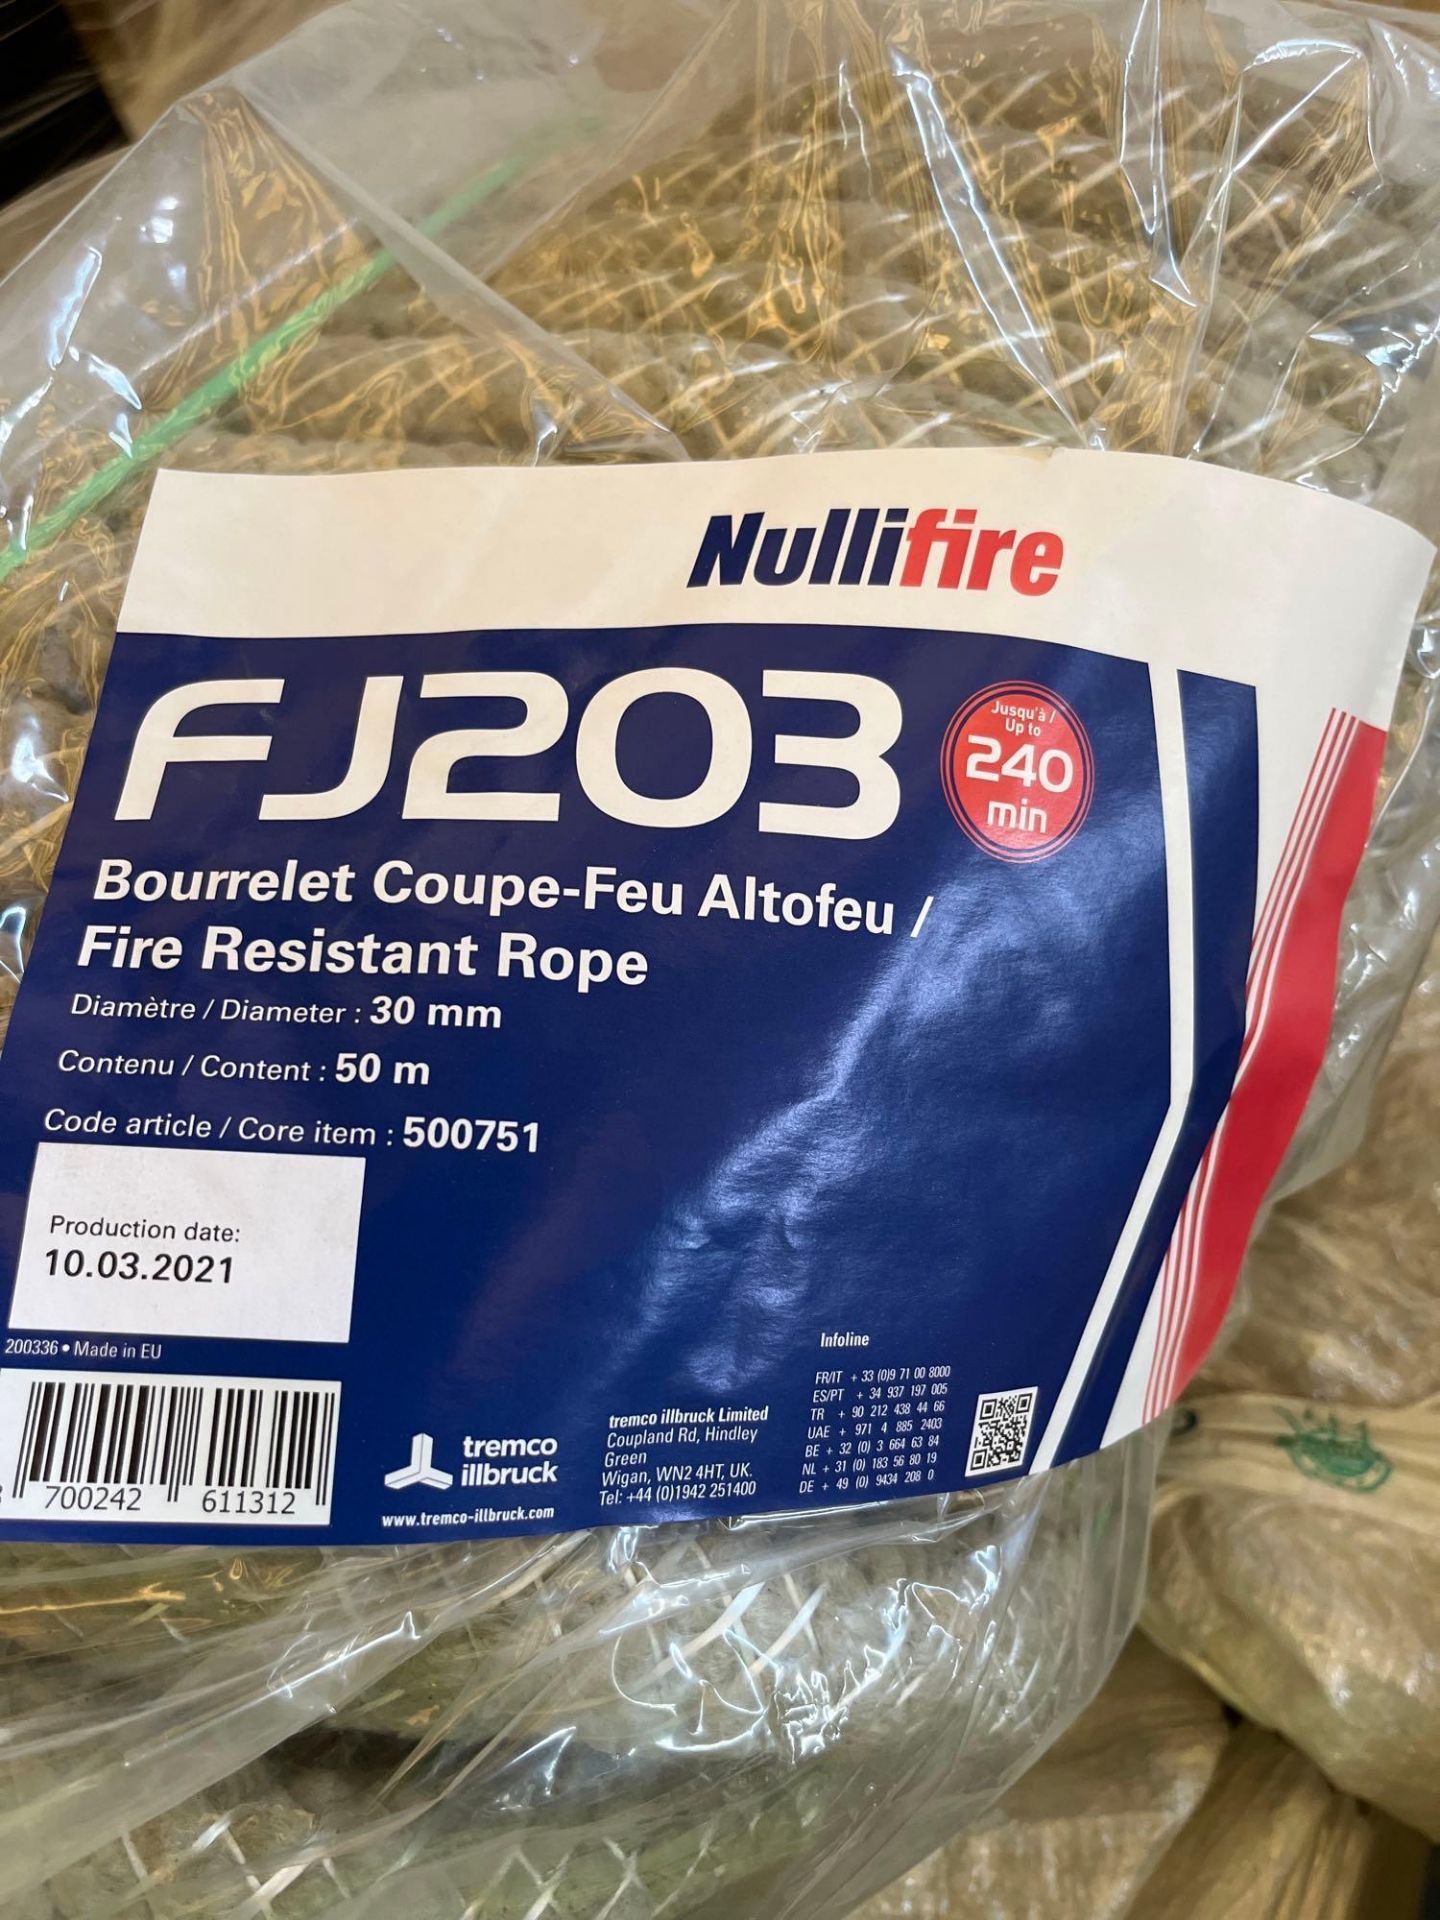 Quantity of 26 of Nullifire FJ203 Fire Resistant Rope 30mm x 50m - Image 4 of 4